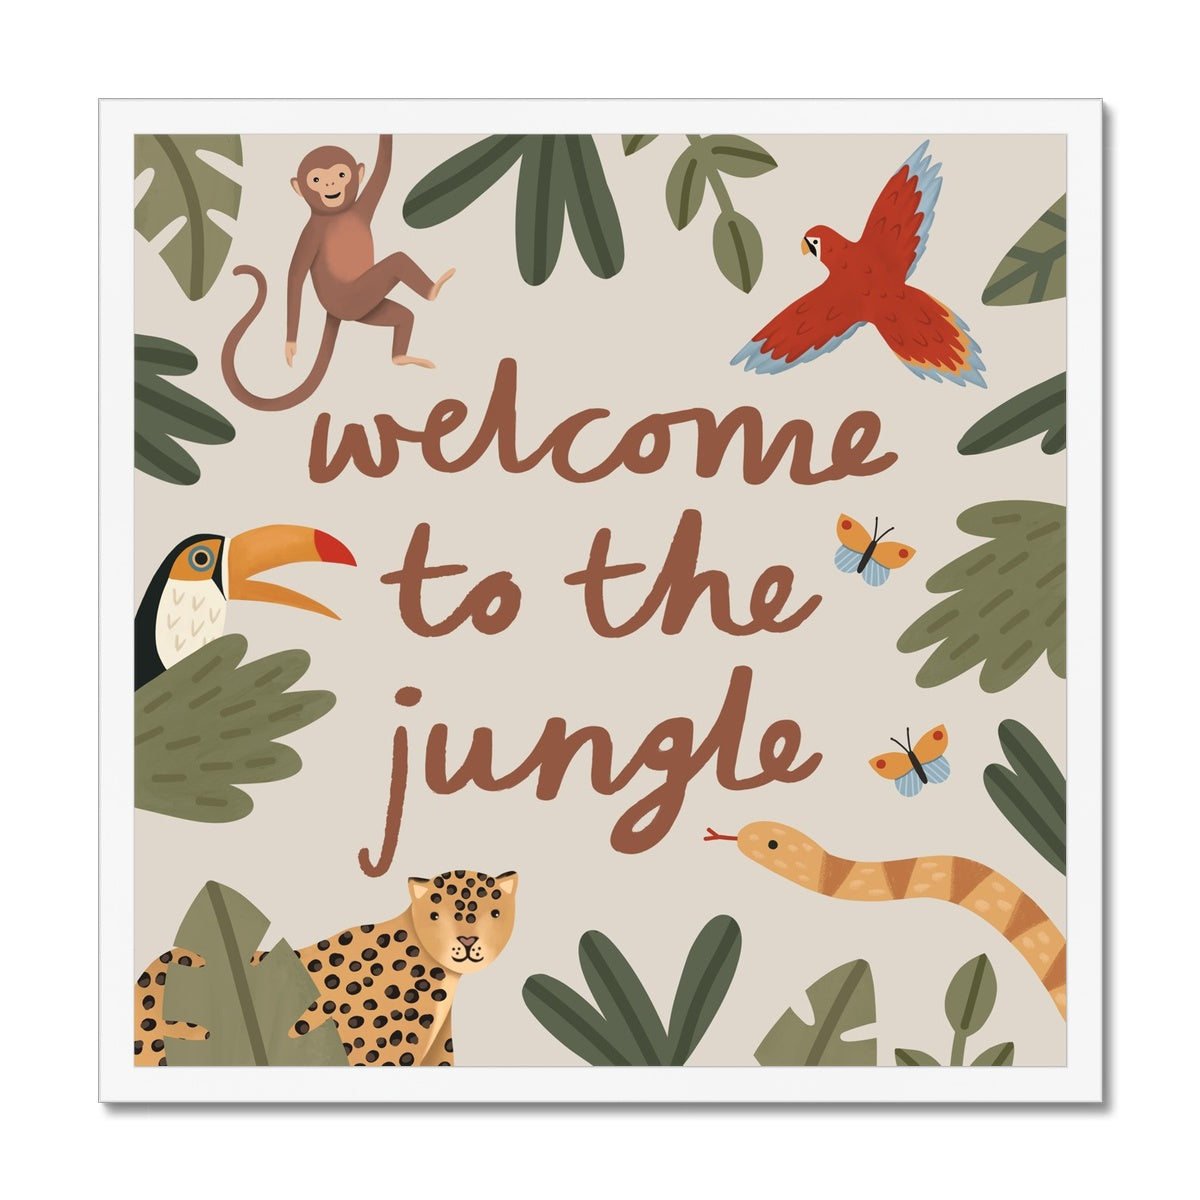 Welcome to the jungle in stone / Framed Print